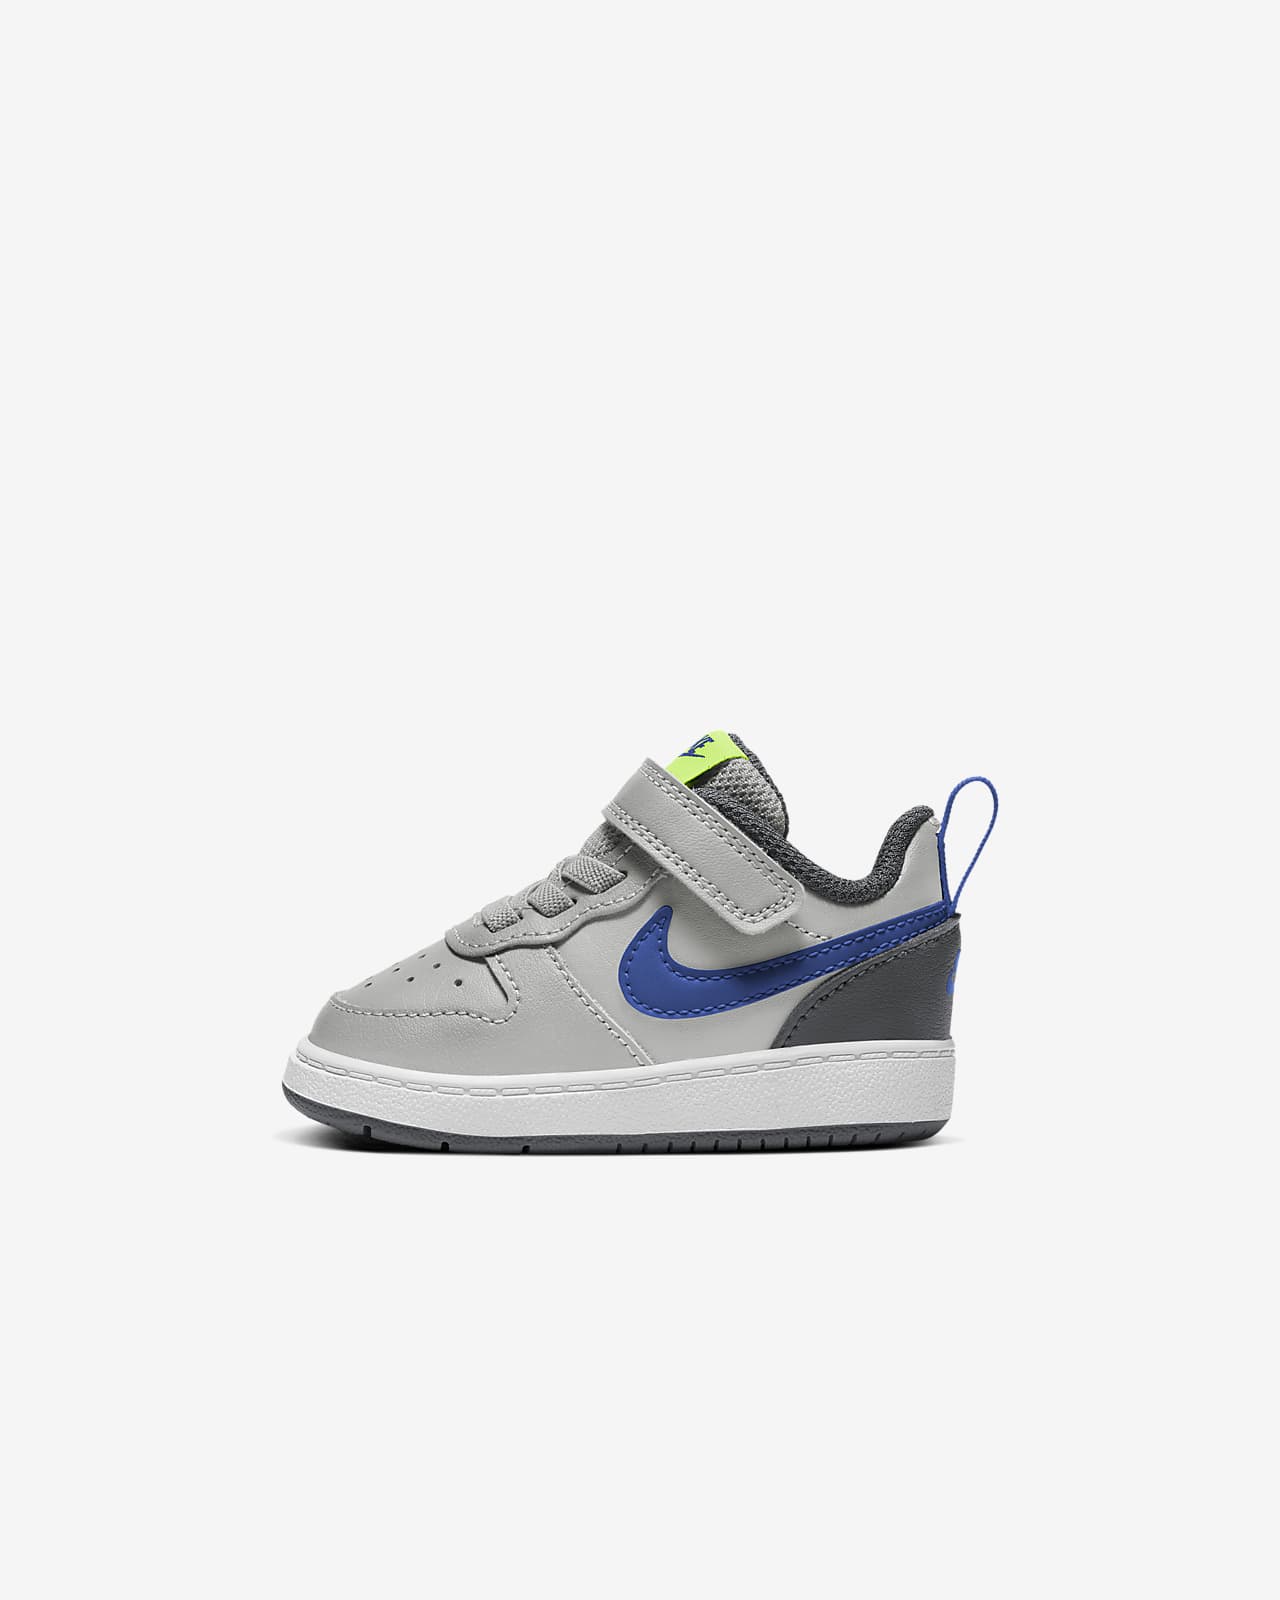 Nike Court Borough Low 2 Baby/Toddler Shoes